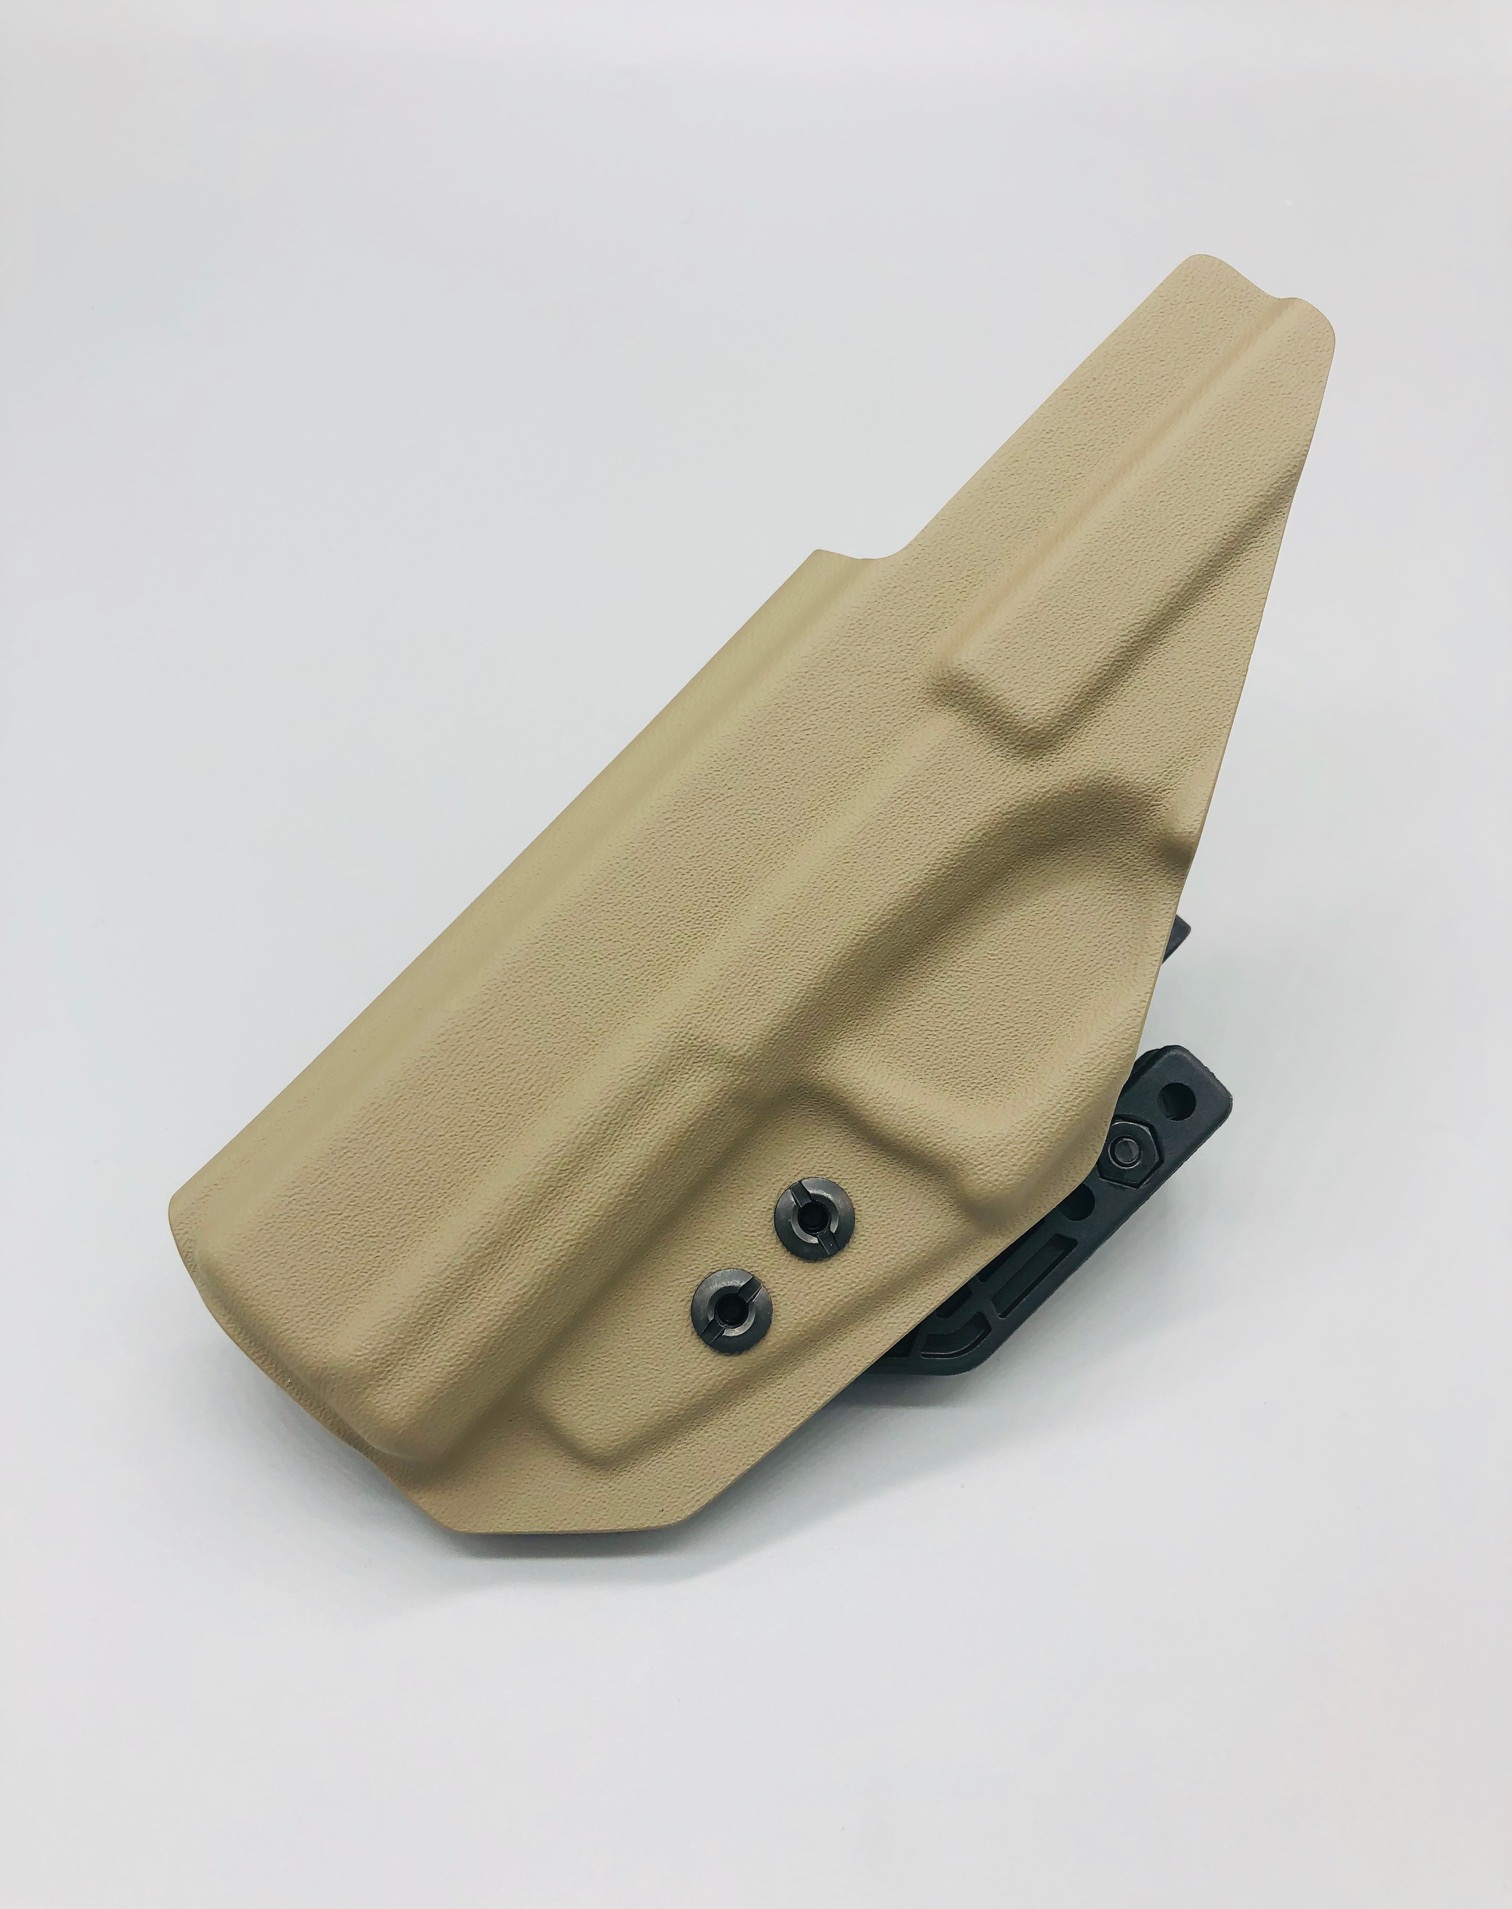 Details about   HK P2000 Tan Kydex IWB Proteus Holster USA Veteran Made with Mod Wing 